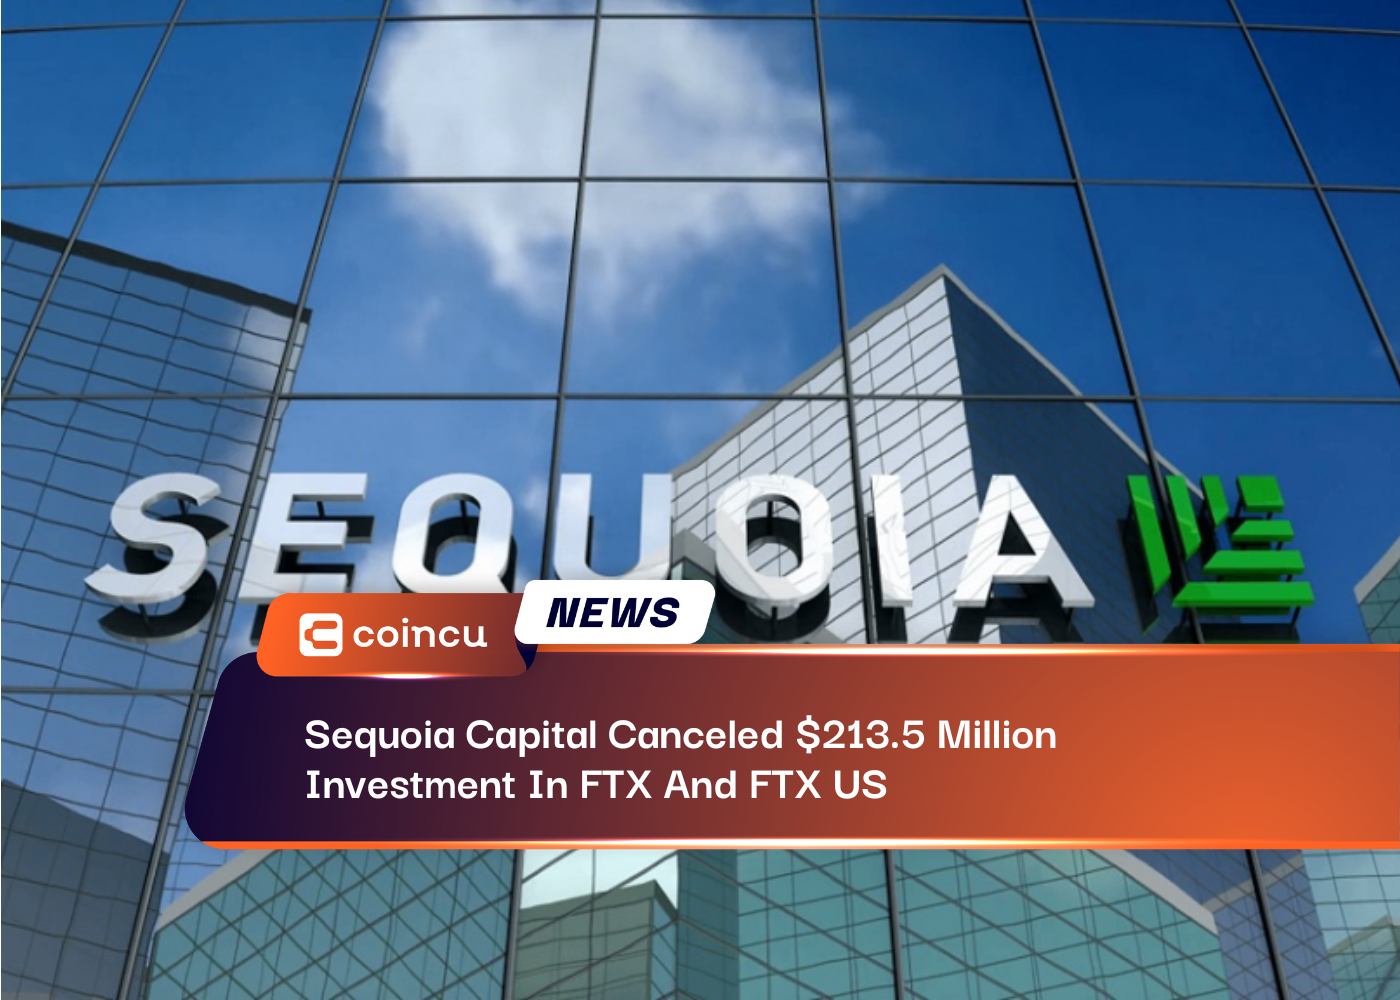 Sequoia Capital Canceled $213.5 Million Investment In FTX And FTX US